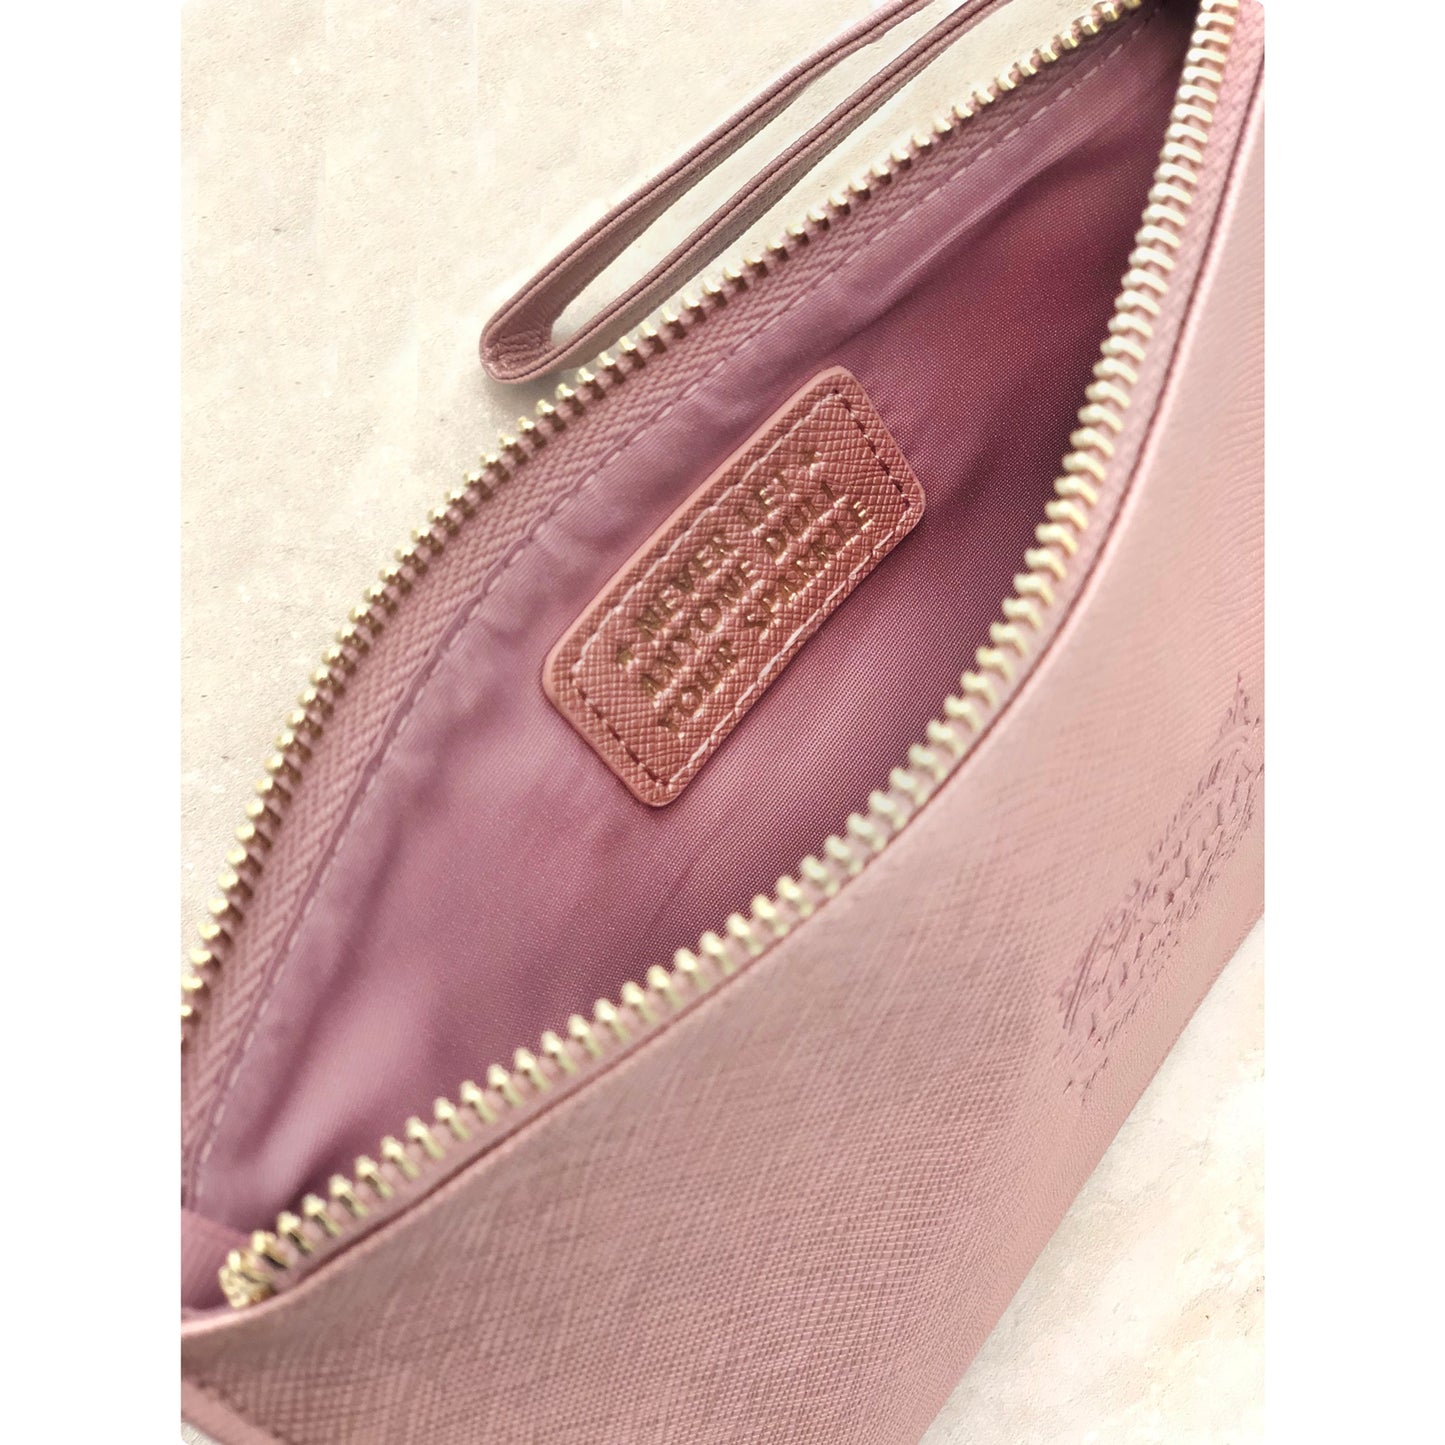 Clutch Bag With Handle & Embossed Text "Natalie"